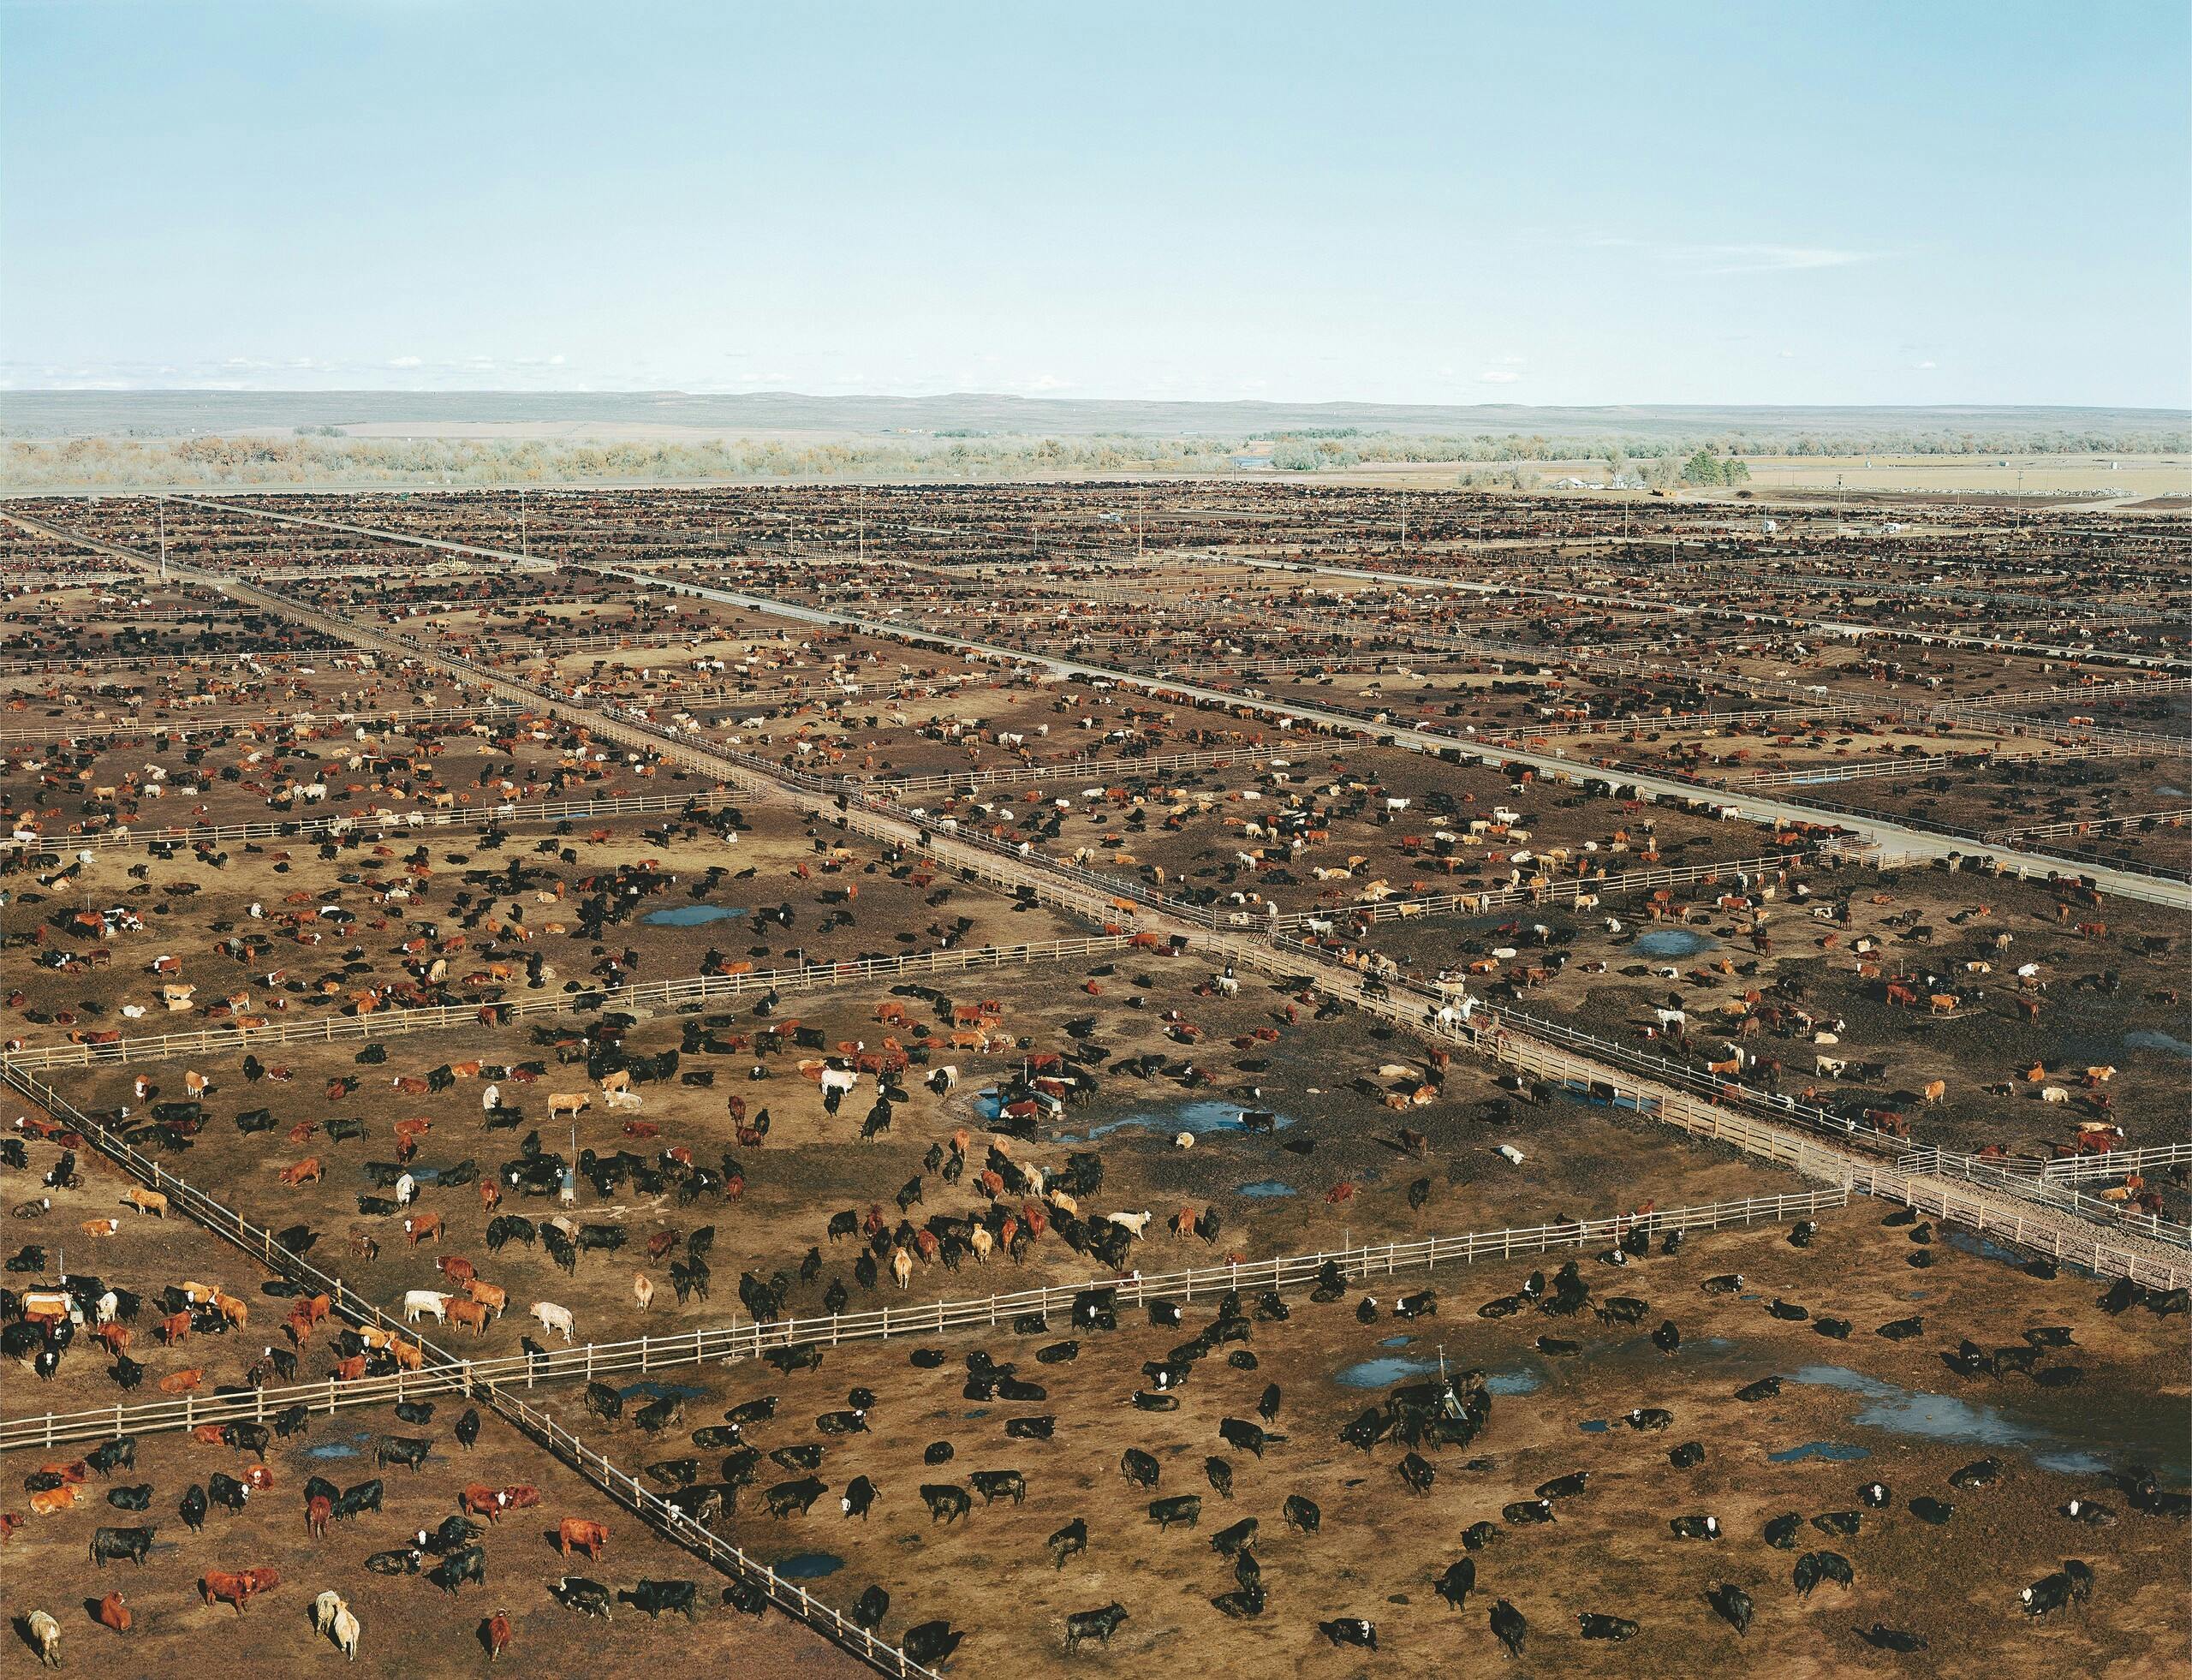 Photography of a huge area of land divided into rectangular plots where cattle are kept, taken from a bird's eye view.